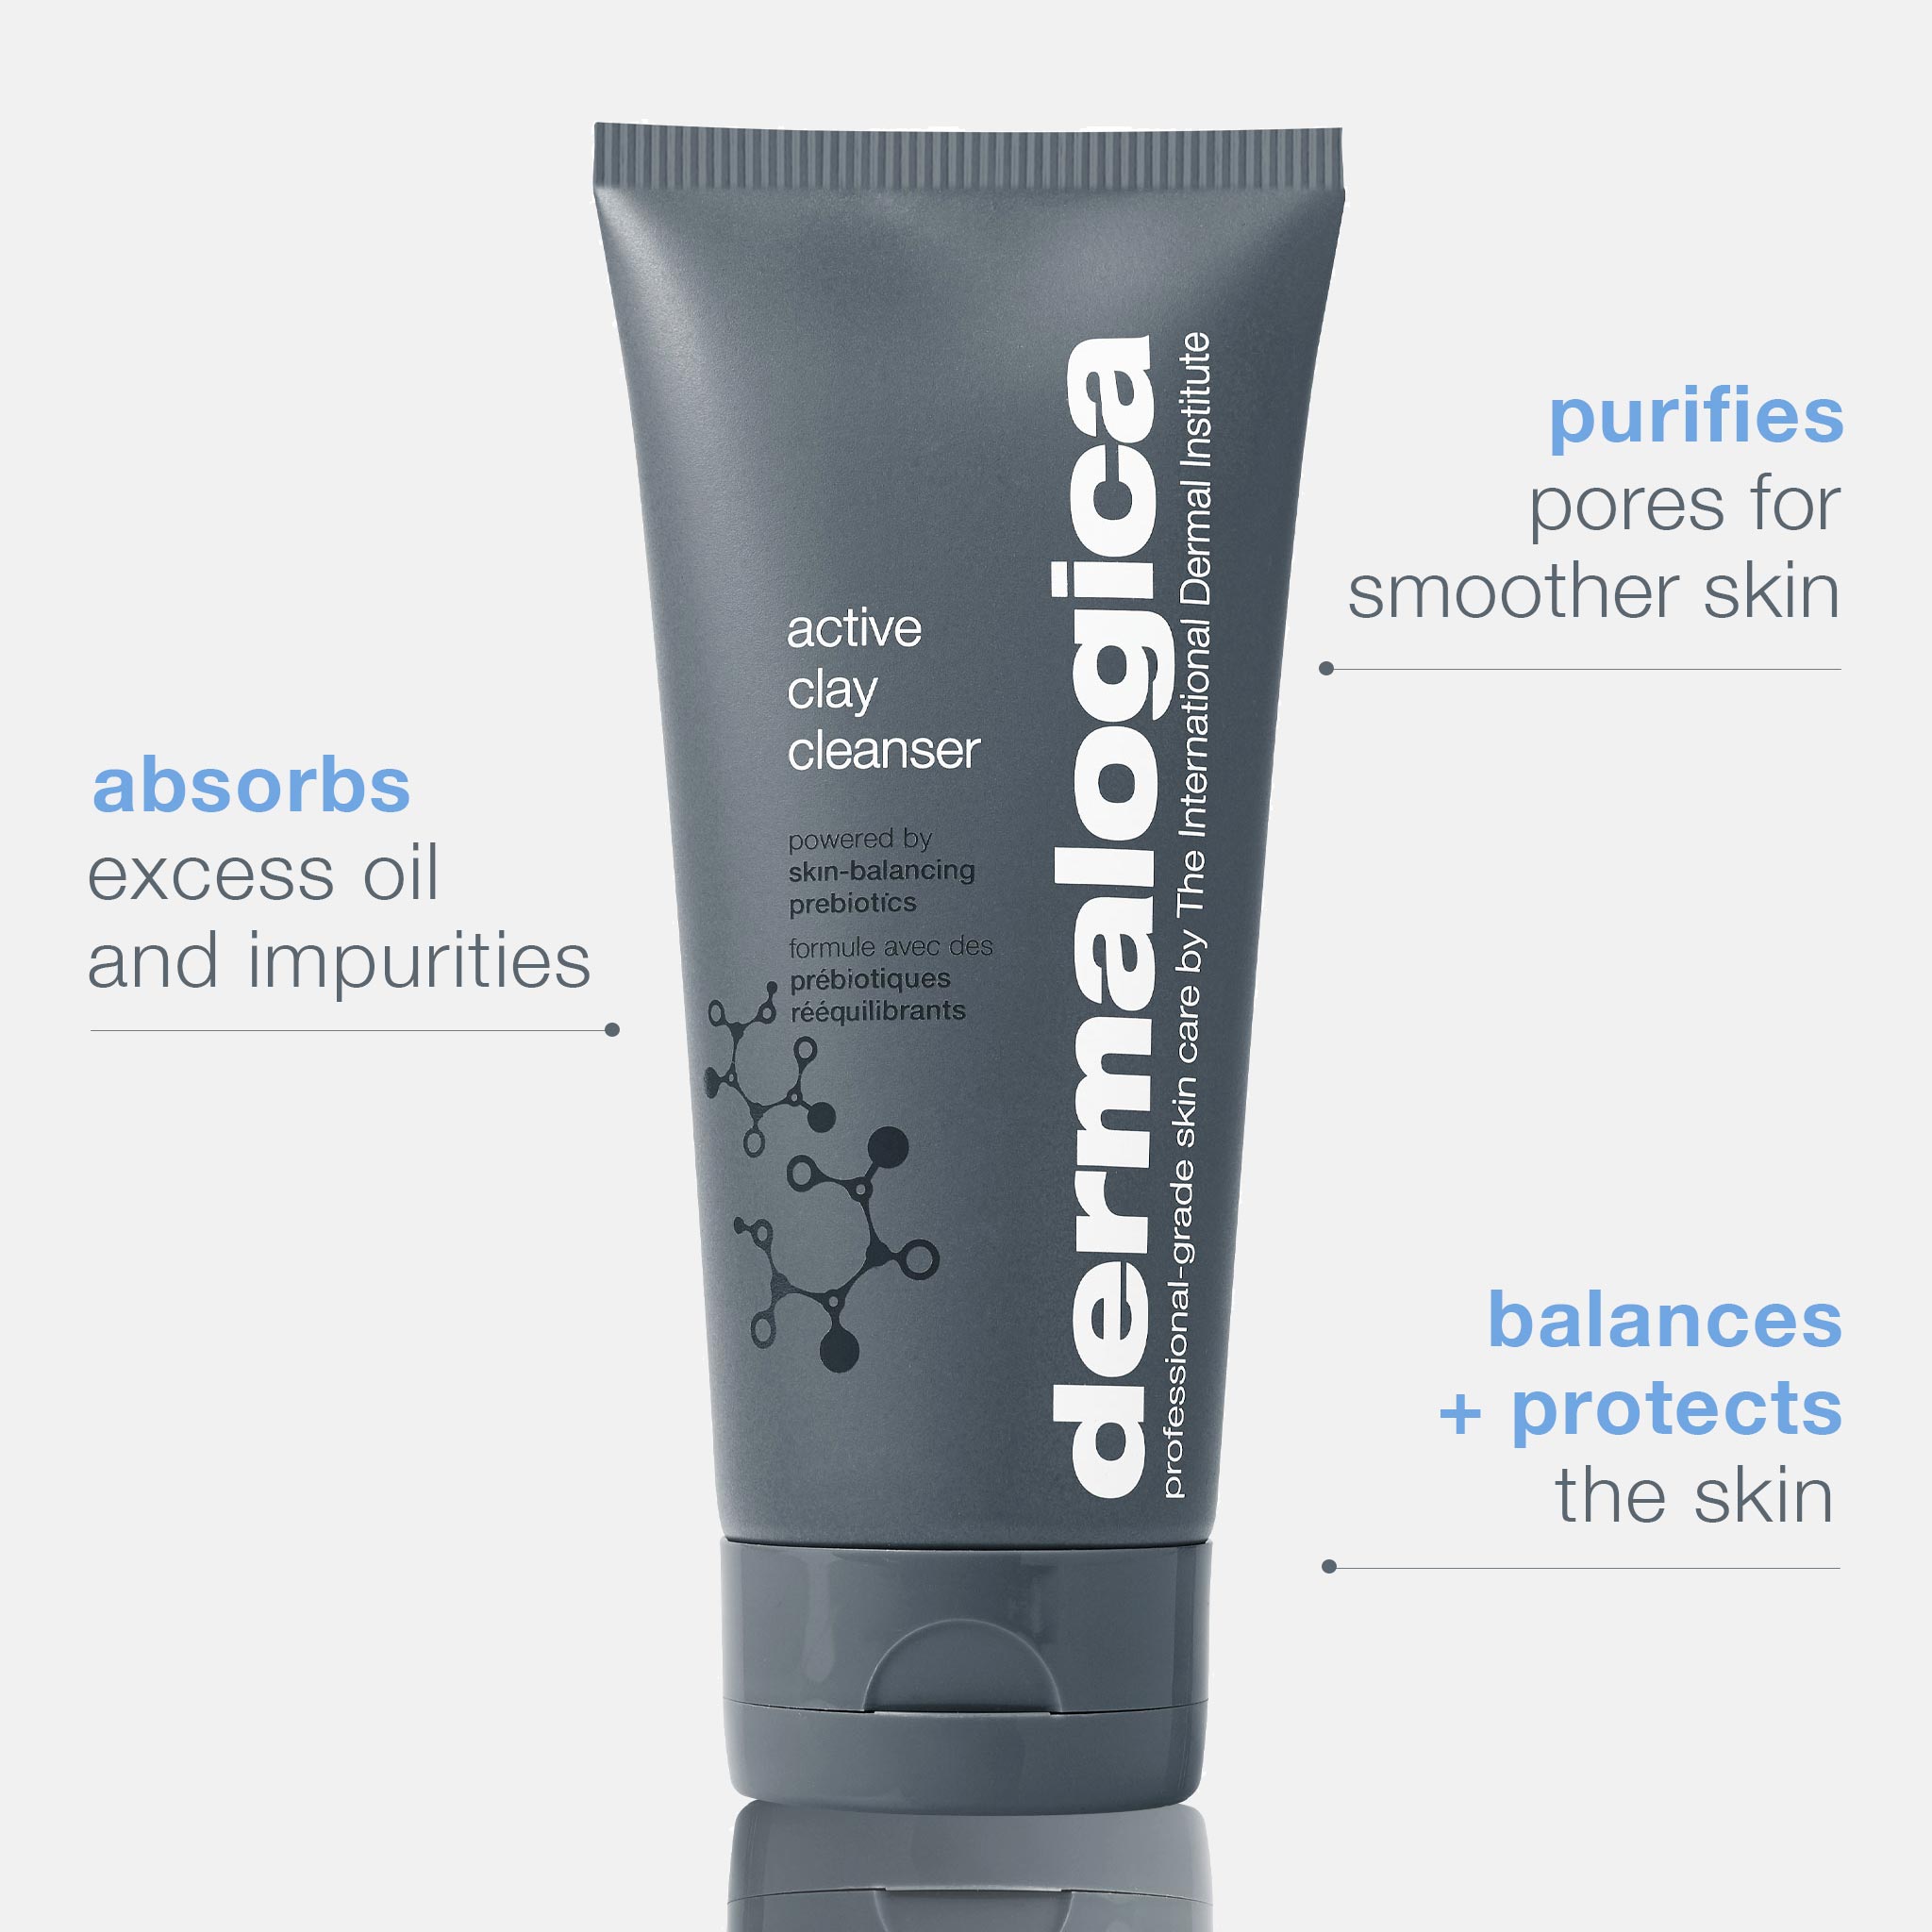 Dermalogica active clay cleanser